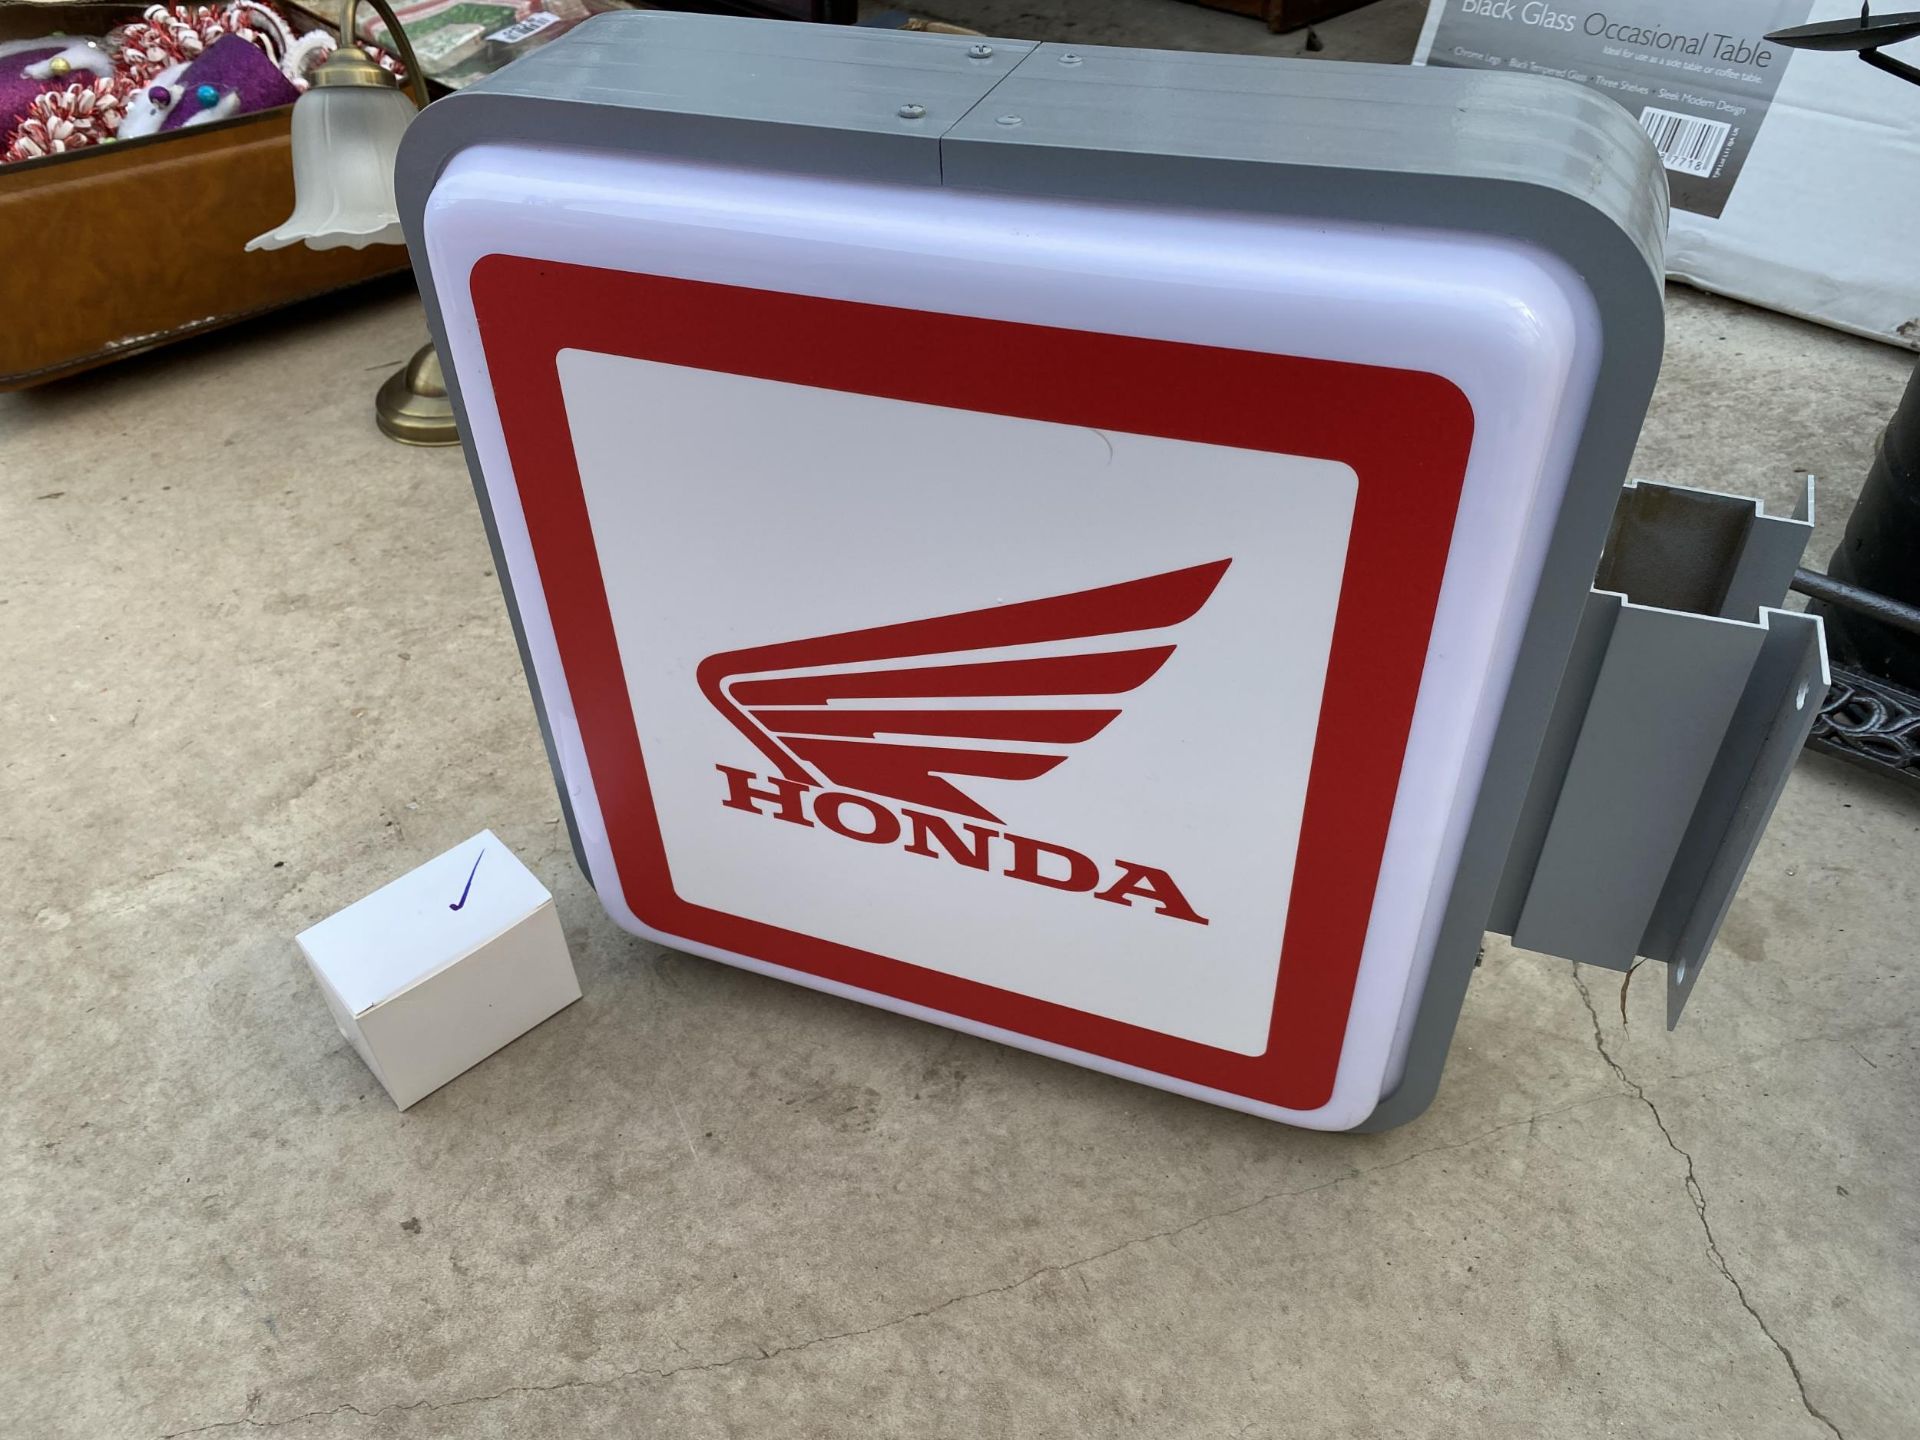 A HONDA DOUBLE SIDED ILLUMINATED LIGHT BOX SIGN - WORKING ORDER AT TIME OF CATALOGUING. WIDTH